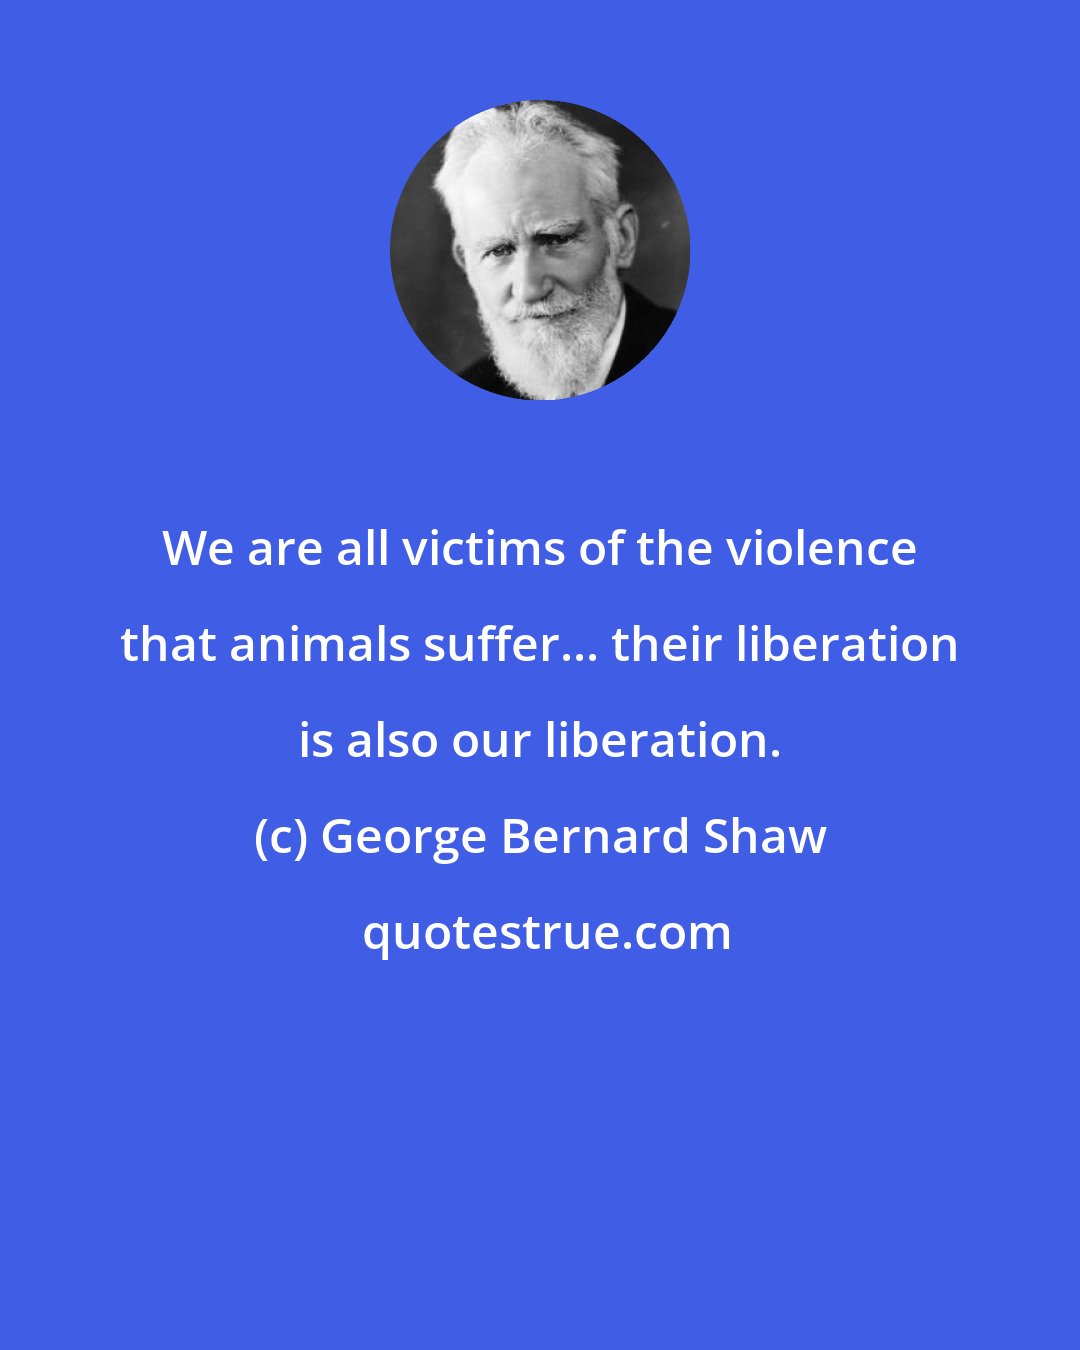 George Bernard Shaw: We are all victims of the violence that animals suffer... their liberation is also our liberation.